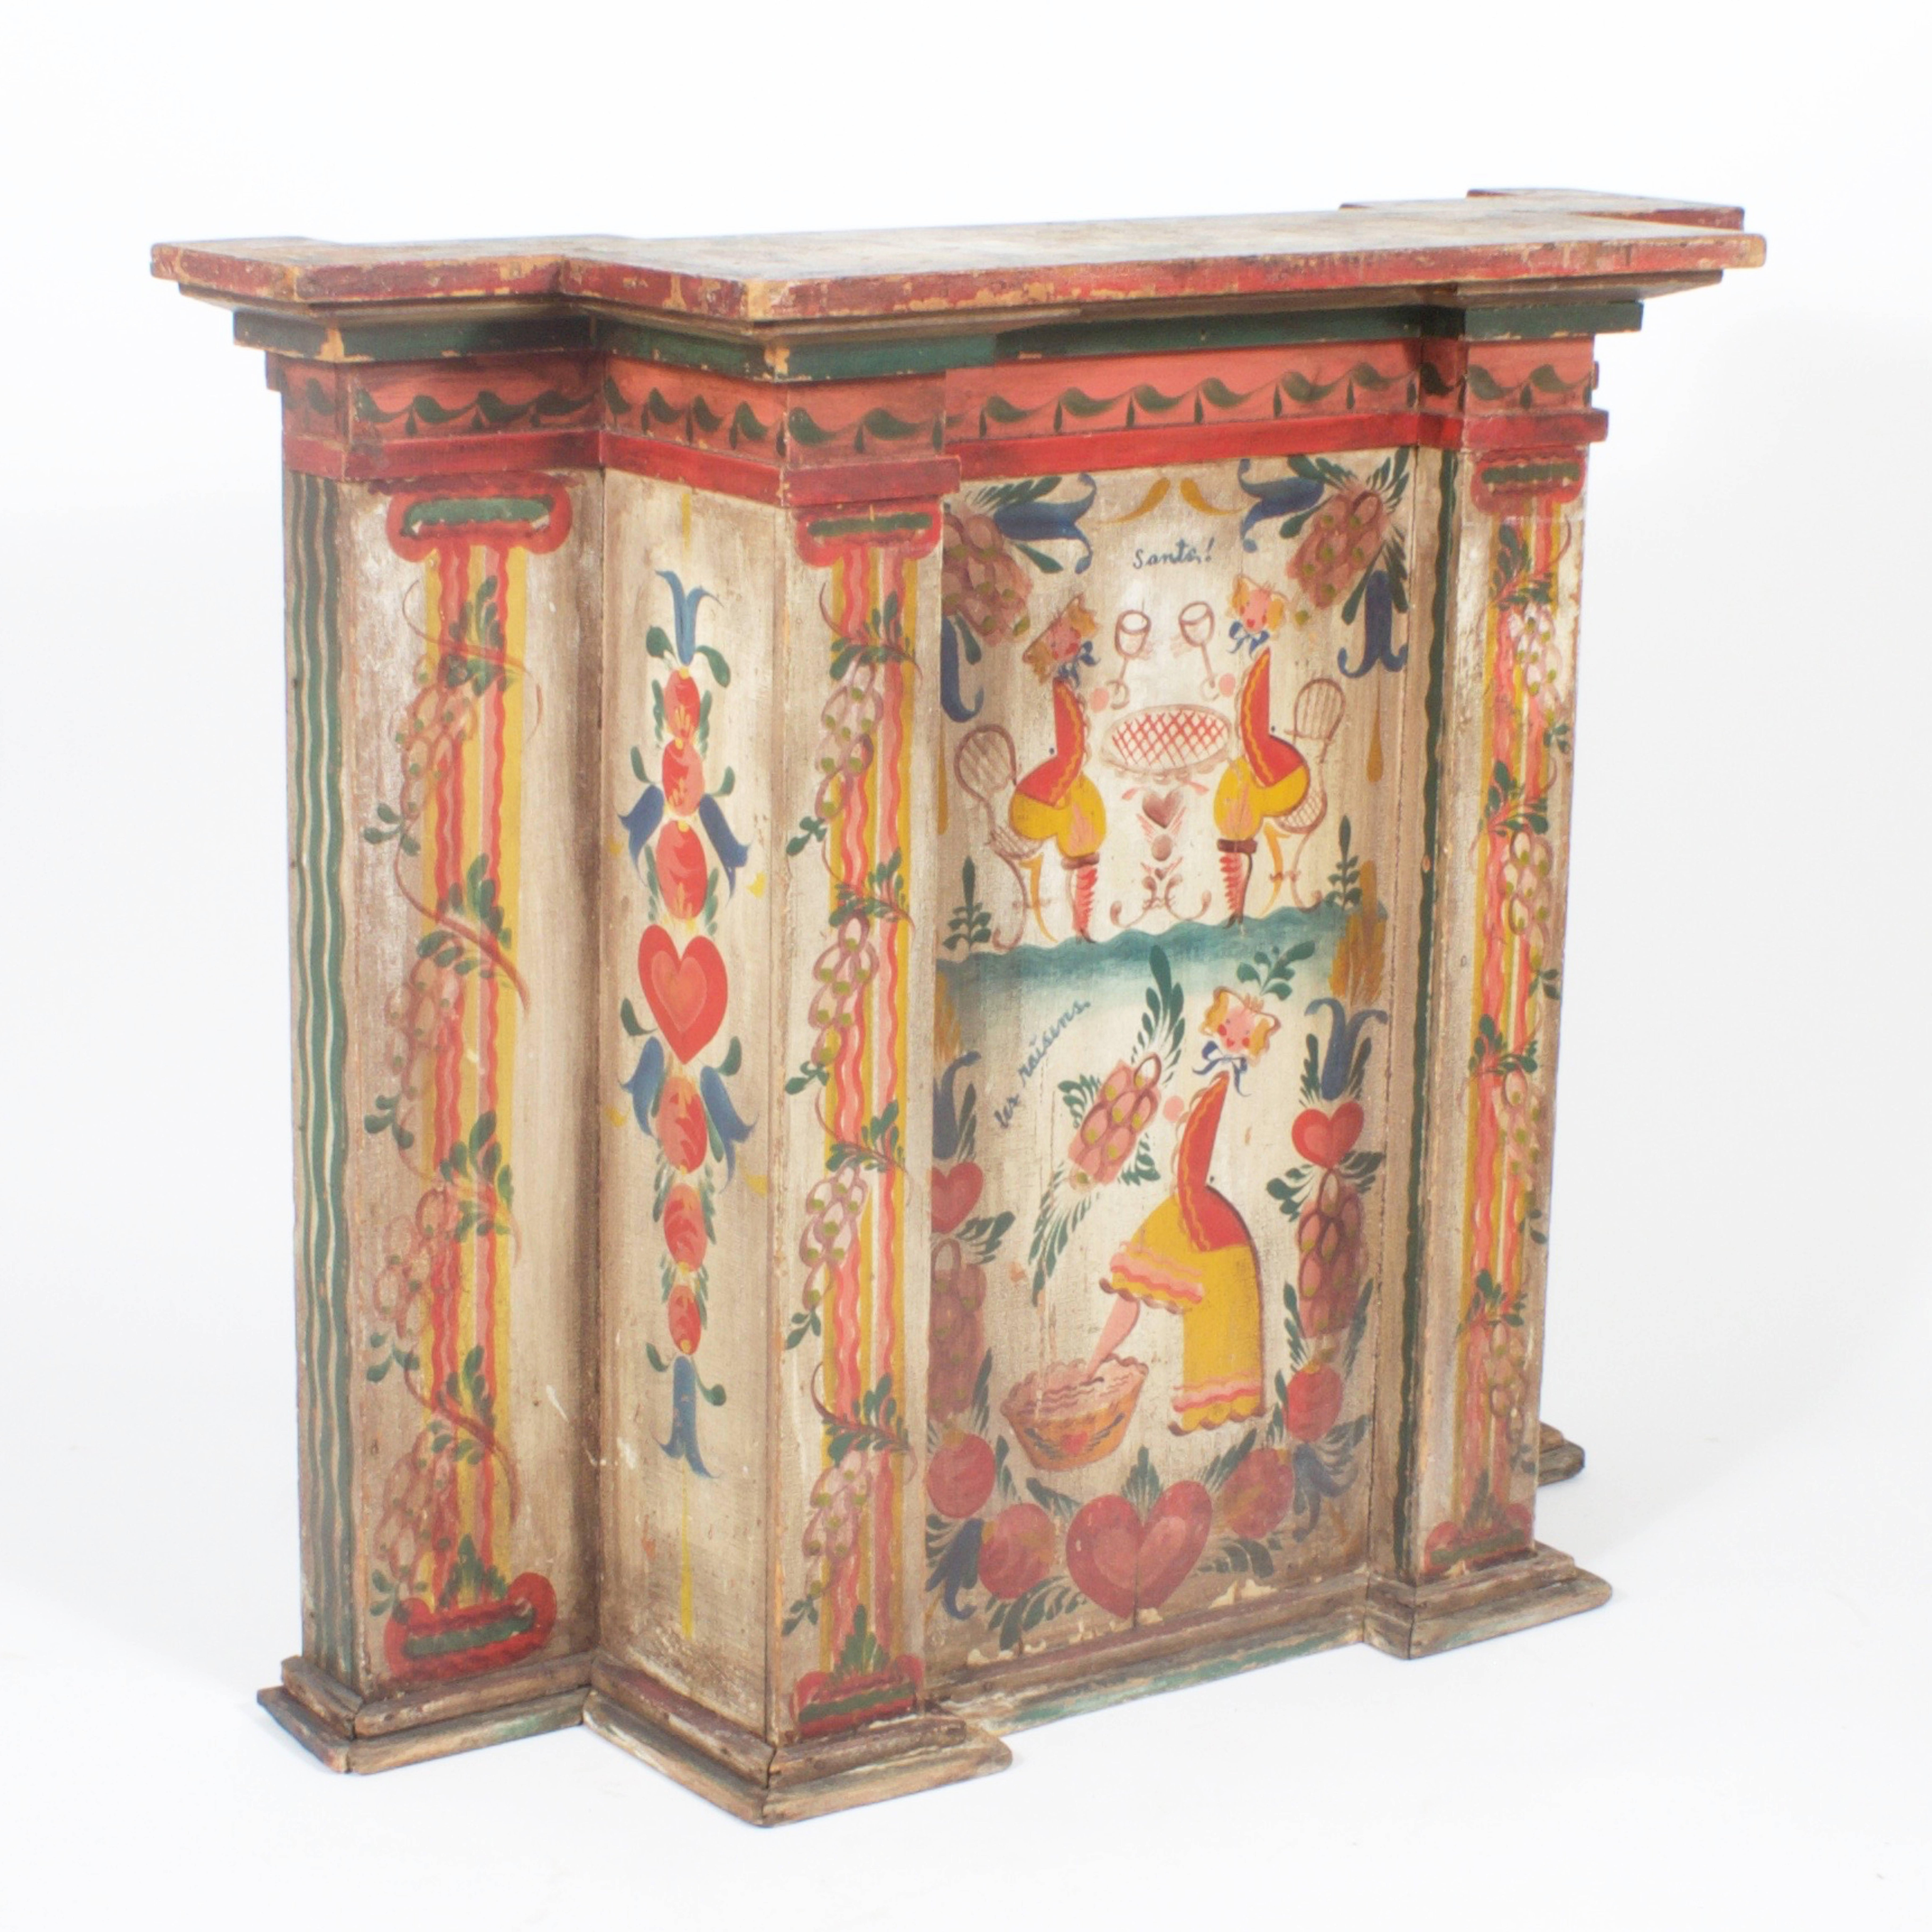 Rustic yet festive serving bar hand-painted in the Alsatian style. Decorated as a celebration of the making and enjoyment of wine. Here is a one of a kind piece that has classical form enhanced by the artist's love of life.